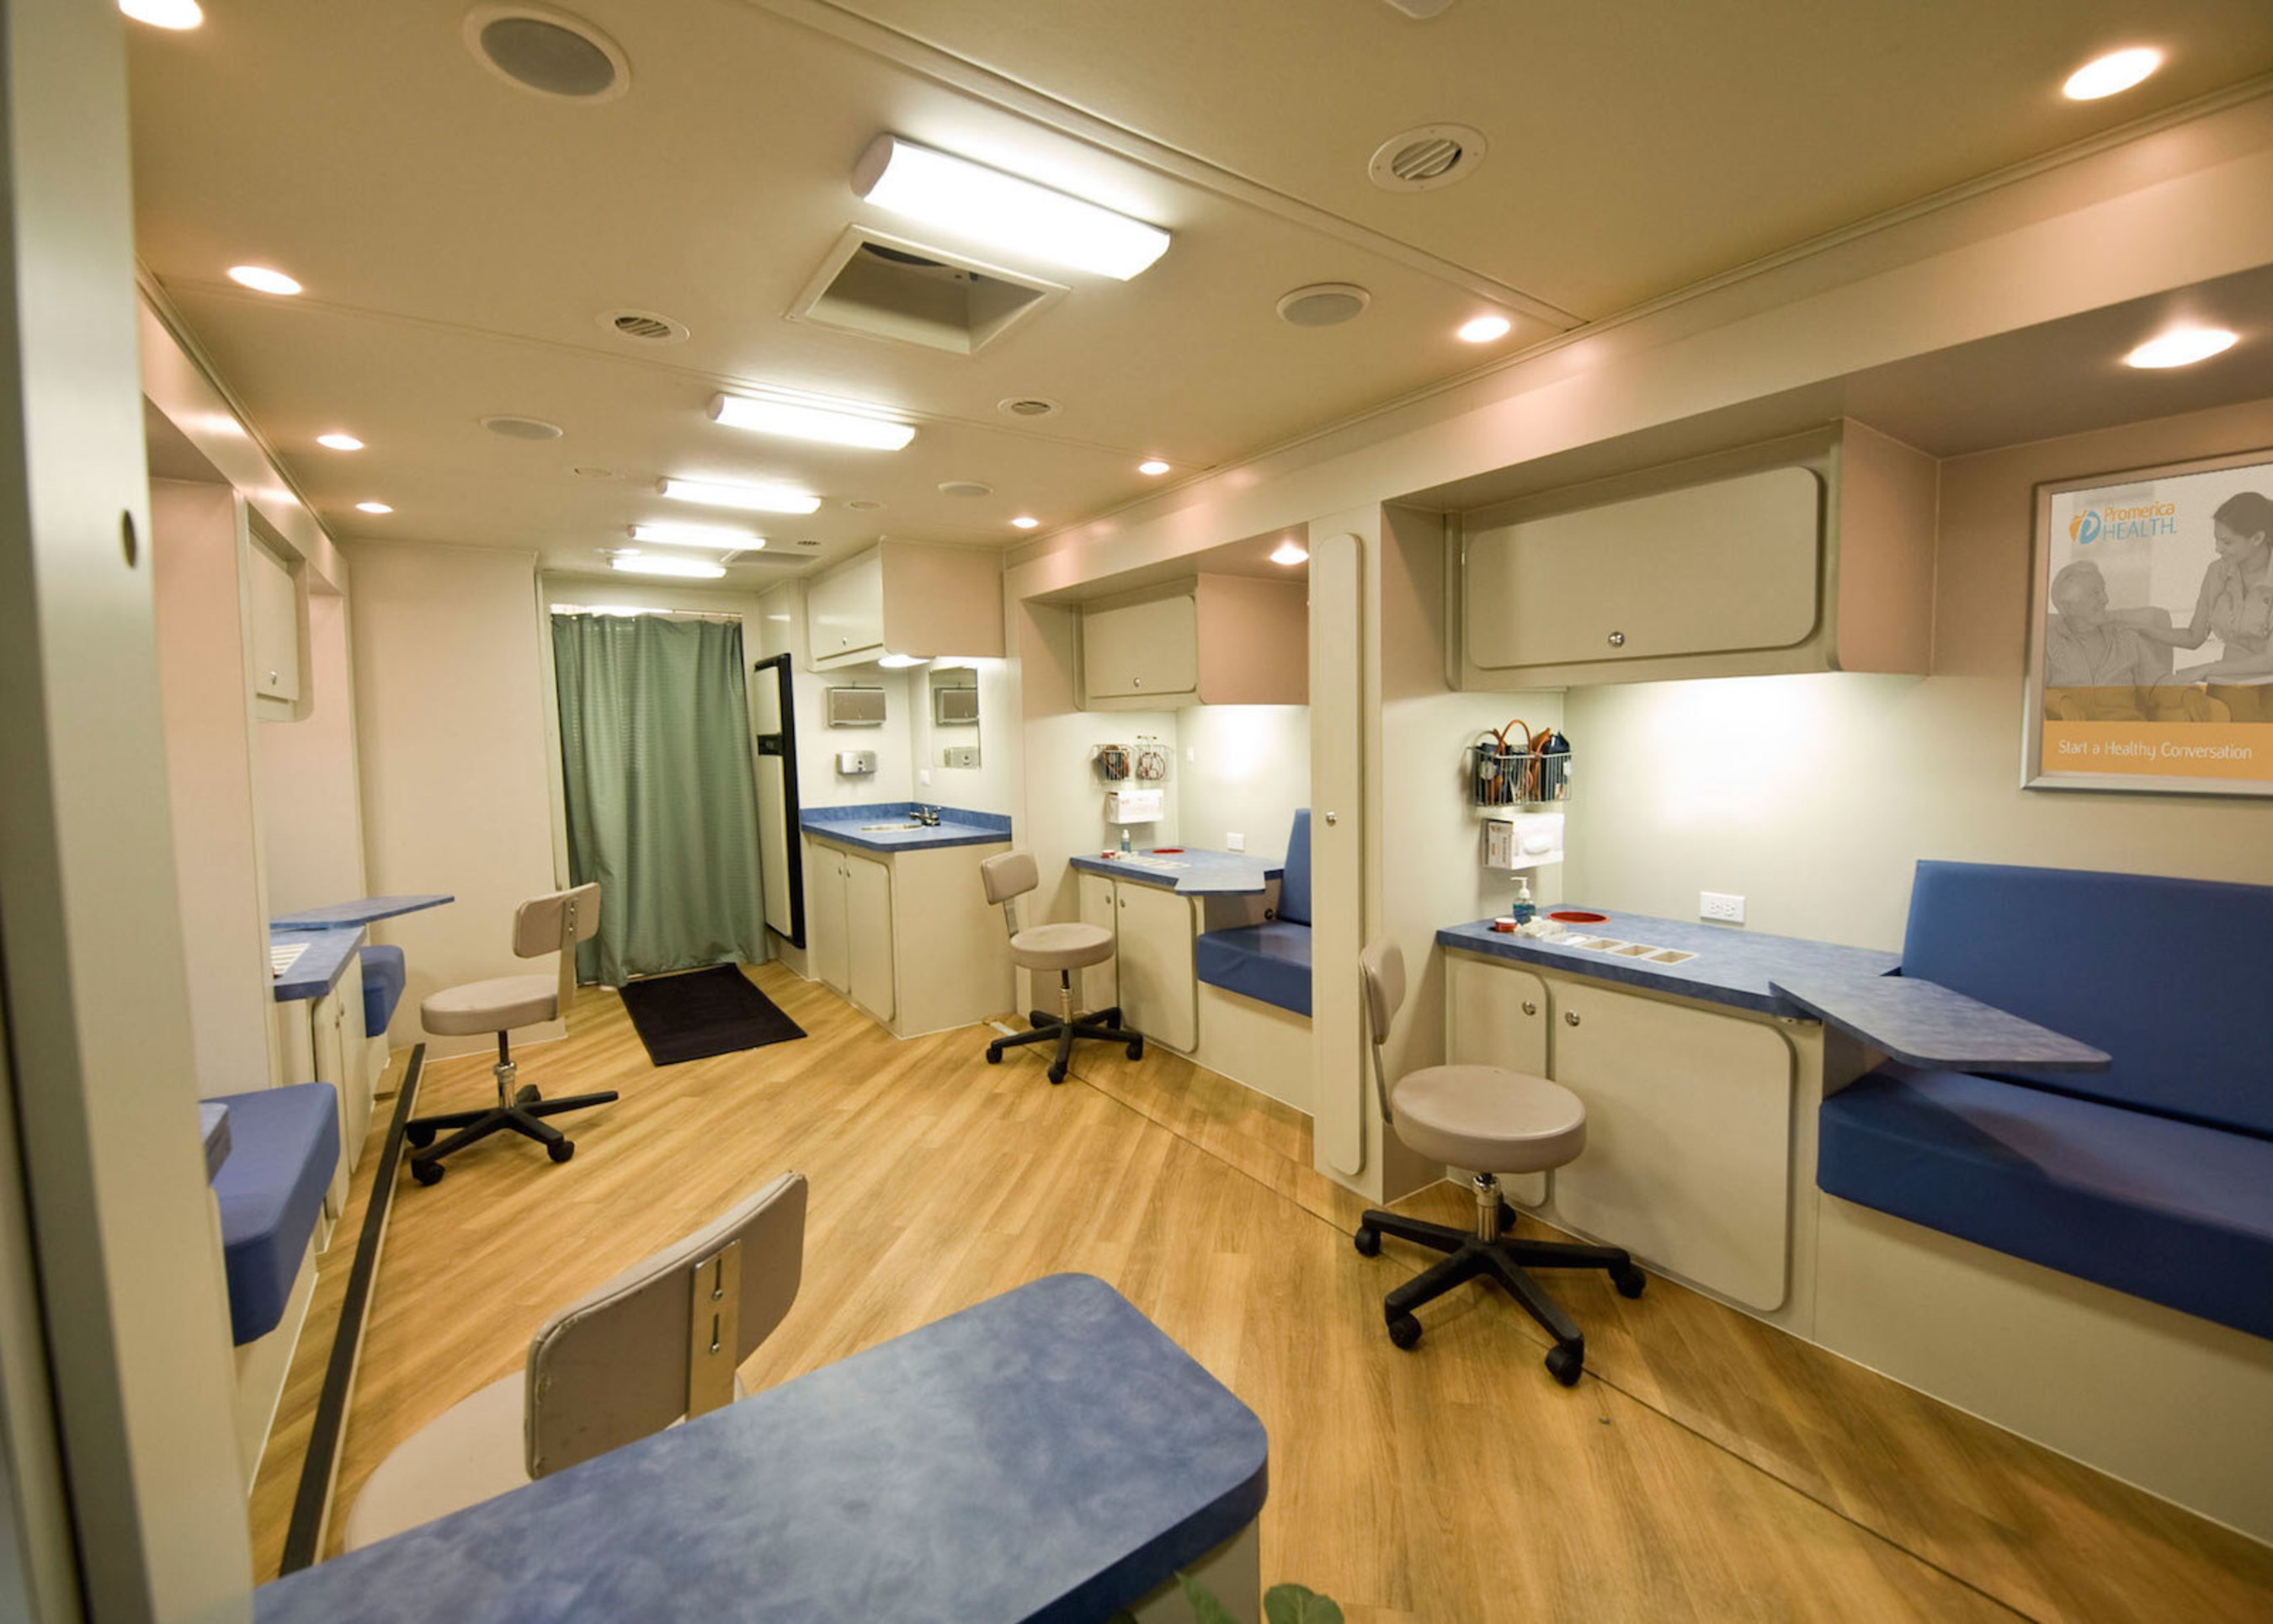 Promerica Health offers a full fleet of customizable vehicles to deploy health and wellness engagements, including 40-foot mobile health screening units. The interior houses up to six private screening areas with state-of-the-art medical equipment, offering patients a private and comfortable environment.